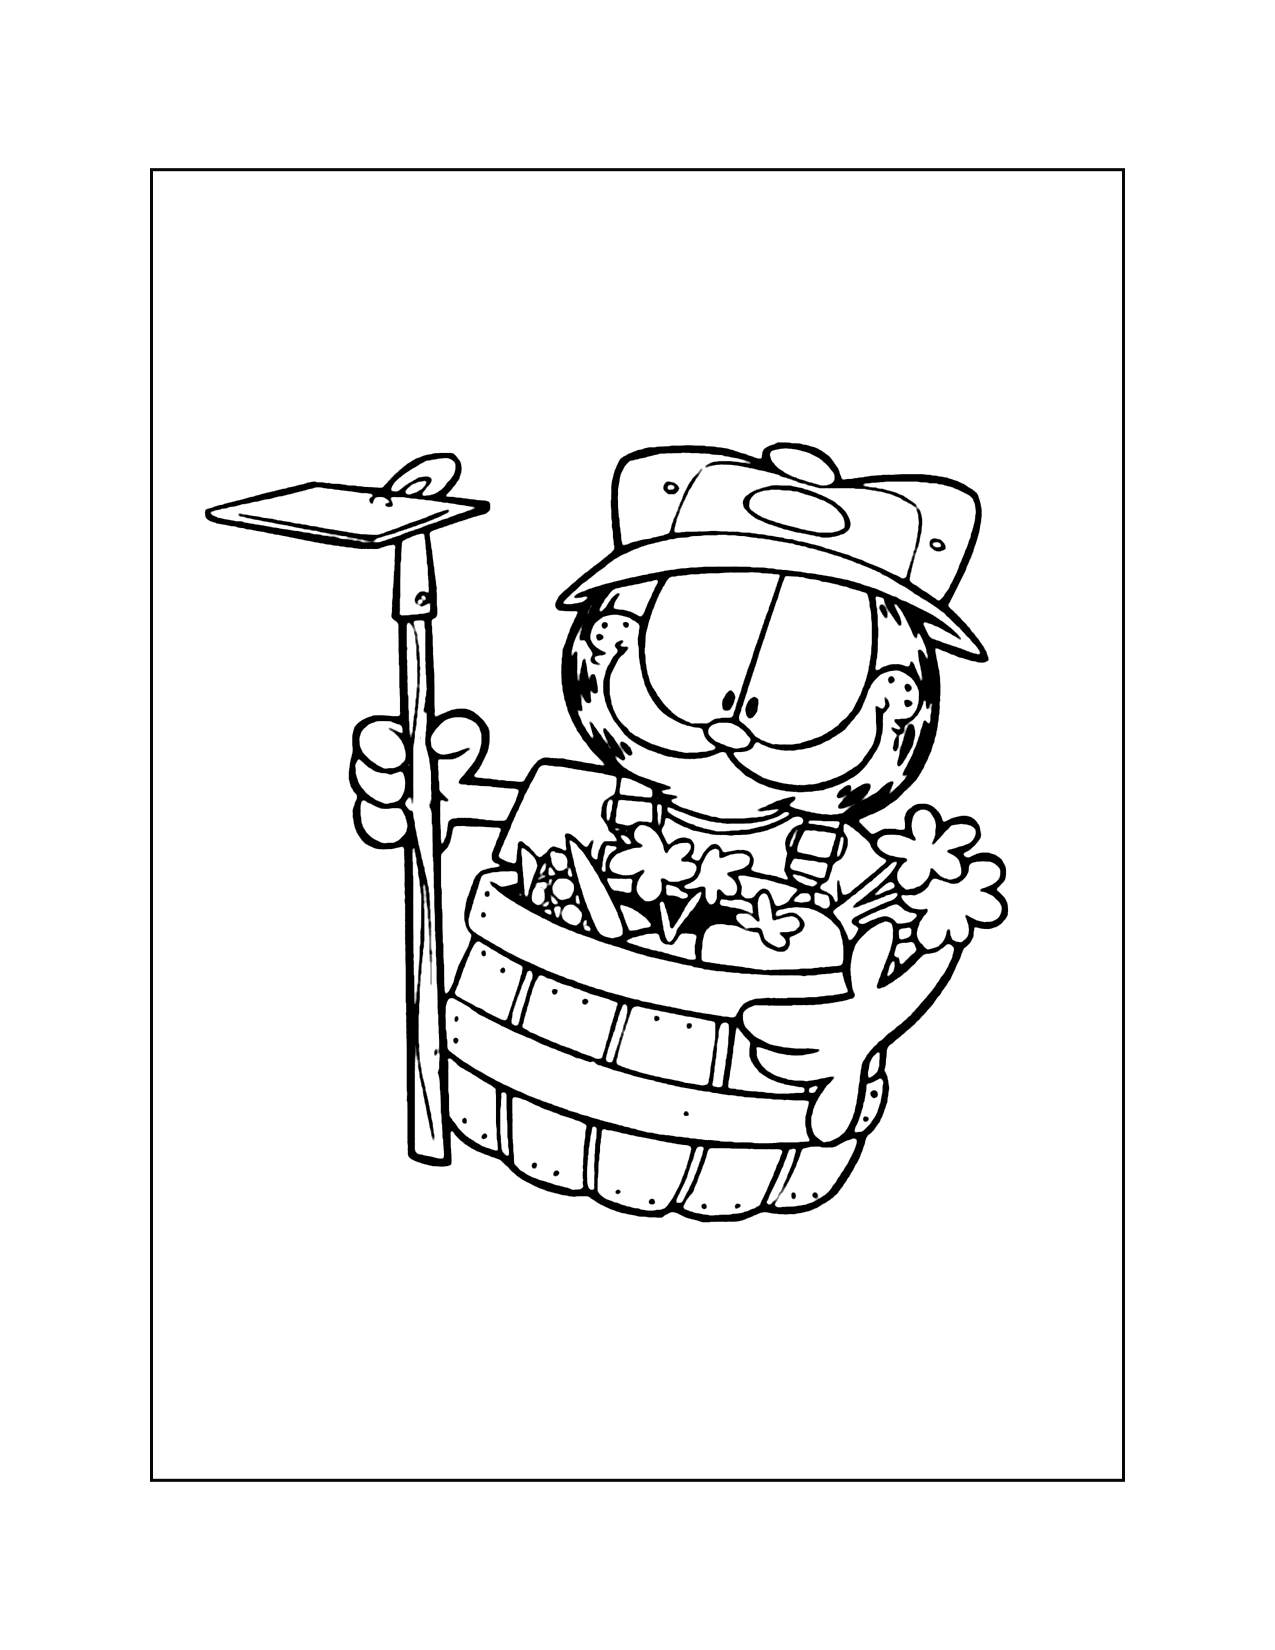 Garfield Gardening Coloring Page